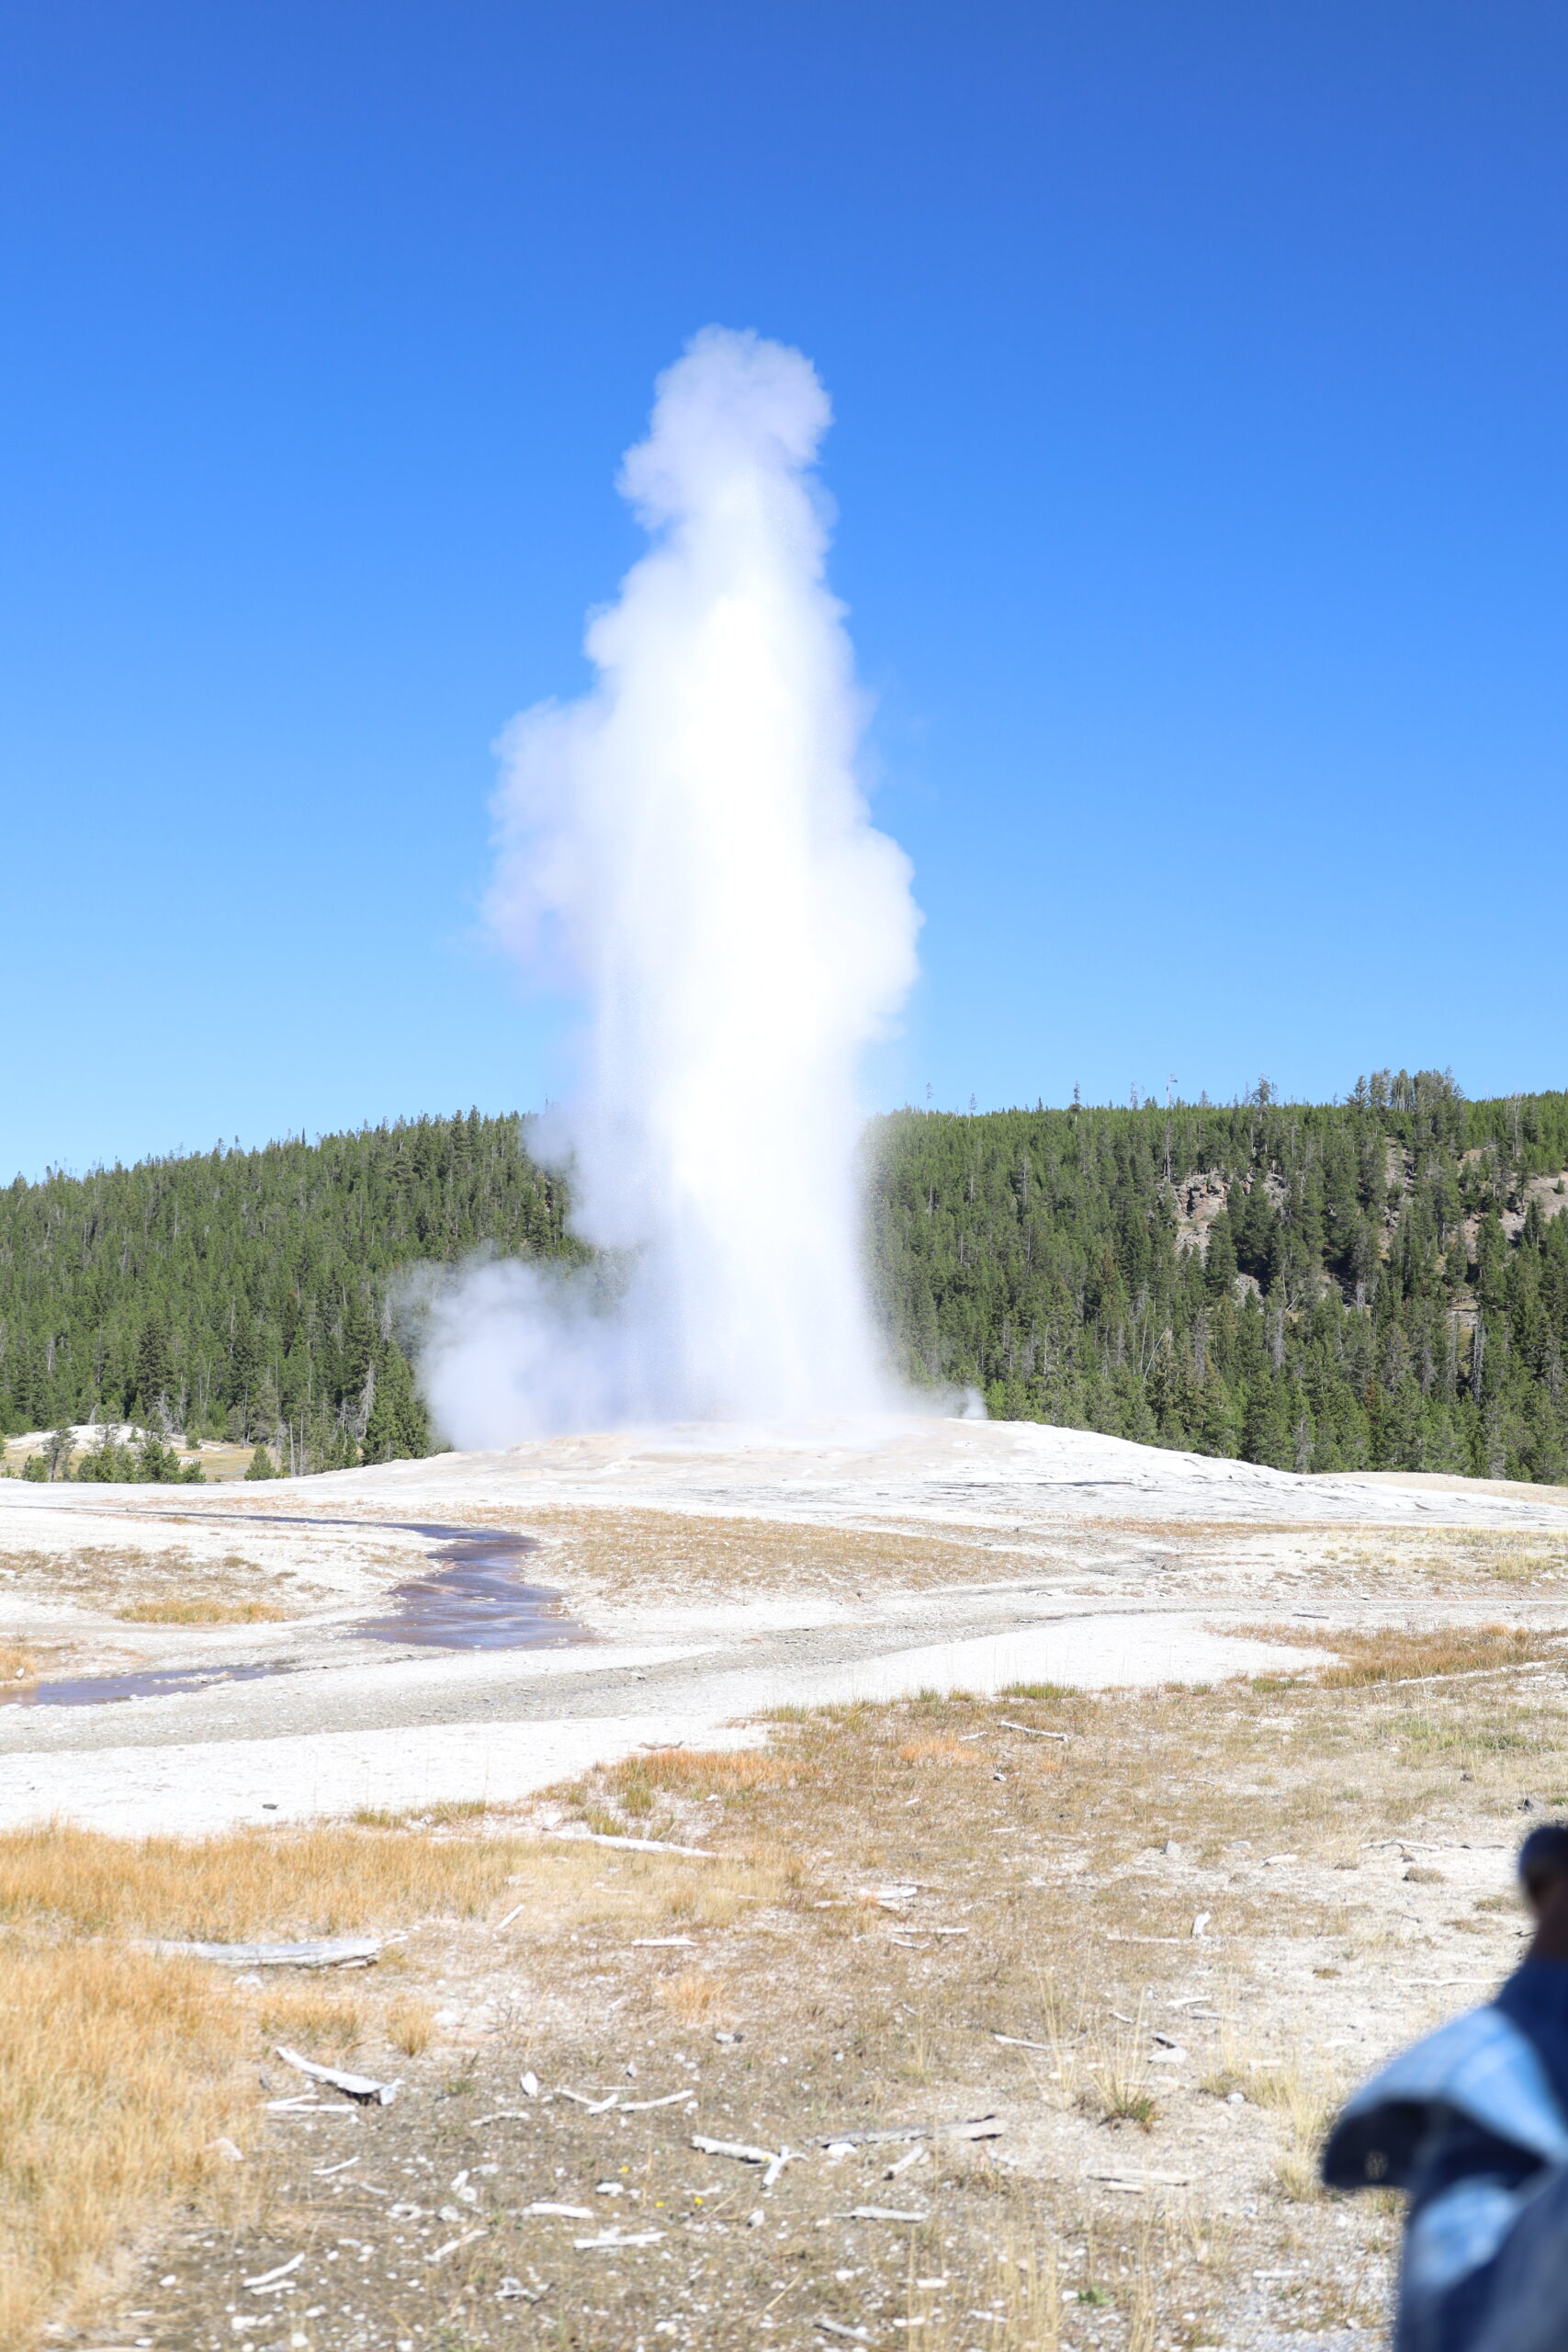 Yellowstone in September: A Scenic Tour in the Fall